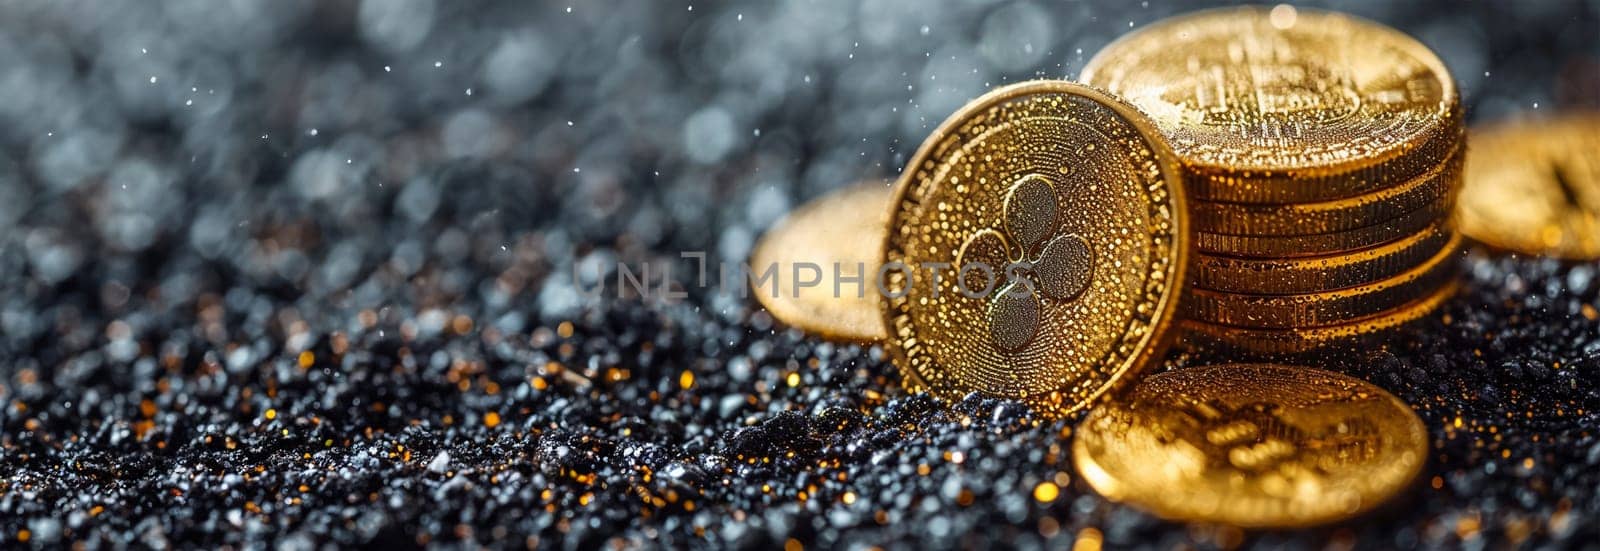 the ripple-xrp virtual currency logo. 3d illustrations. Bitcoin and cryptocurrency investing concept. Cryptocurrency golden coin with gold ripple symbol. Rise and fall charts of alt coins. by Annebel146